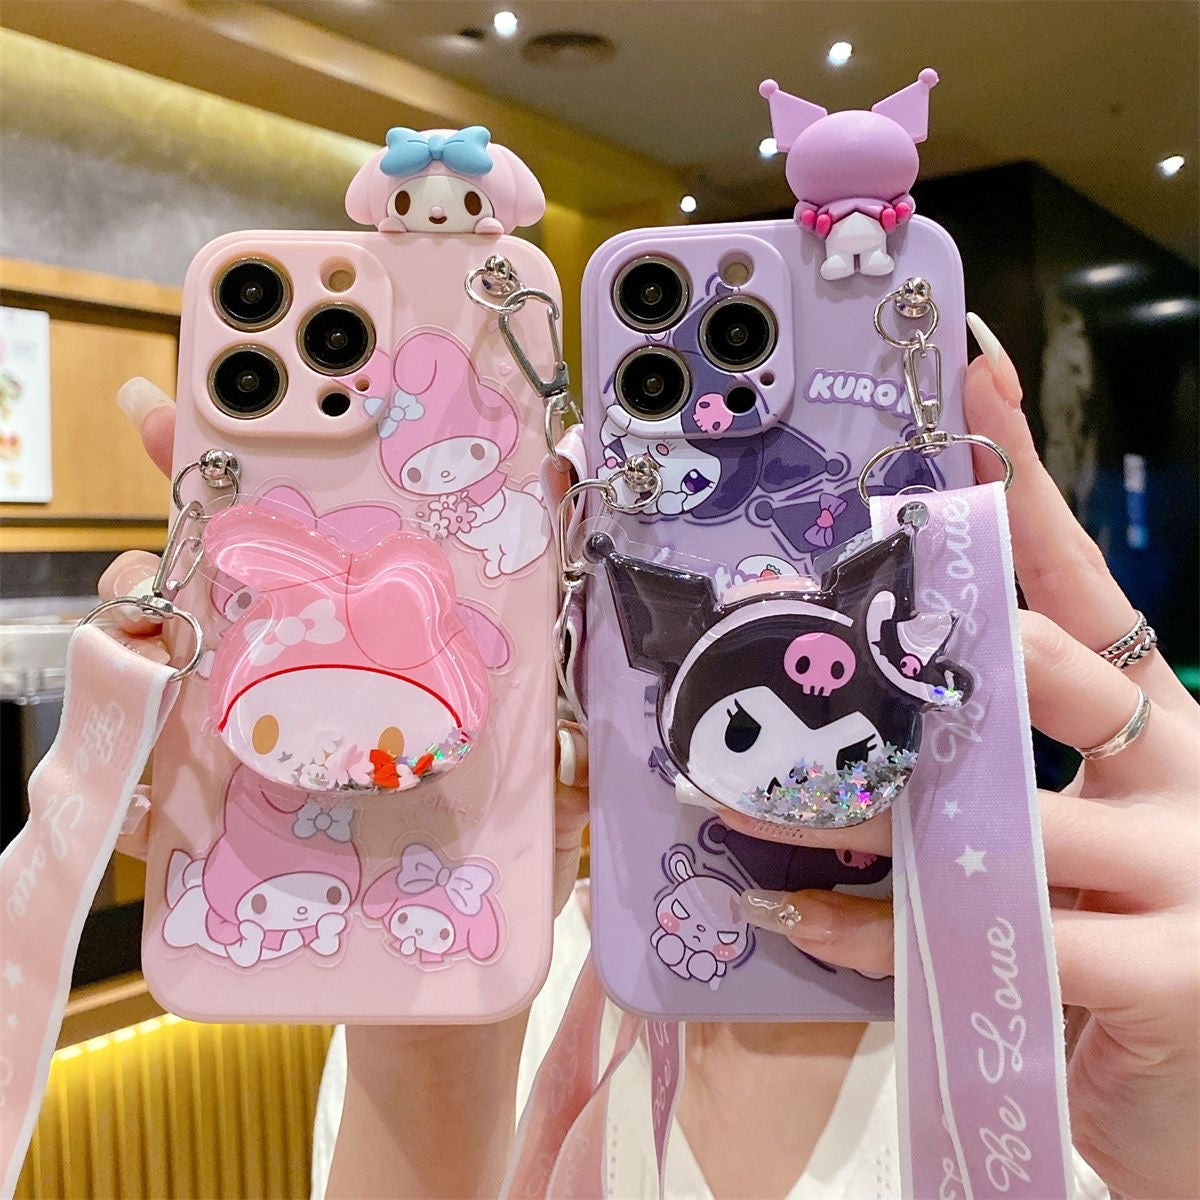 Kuromi and My melody phone case